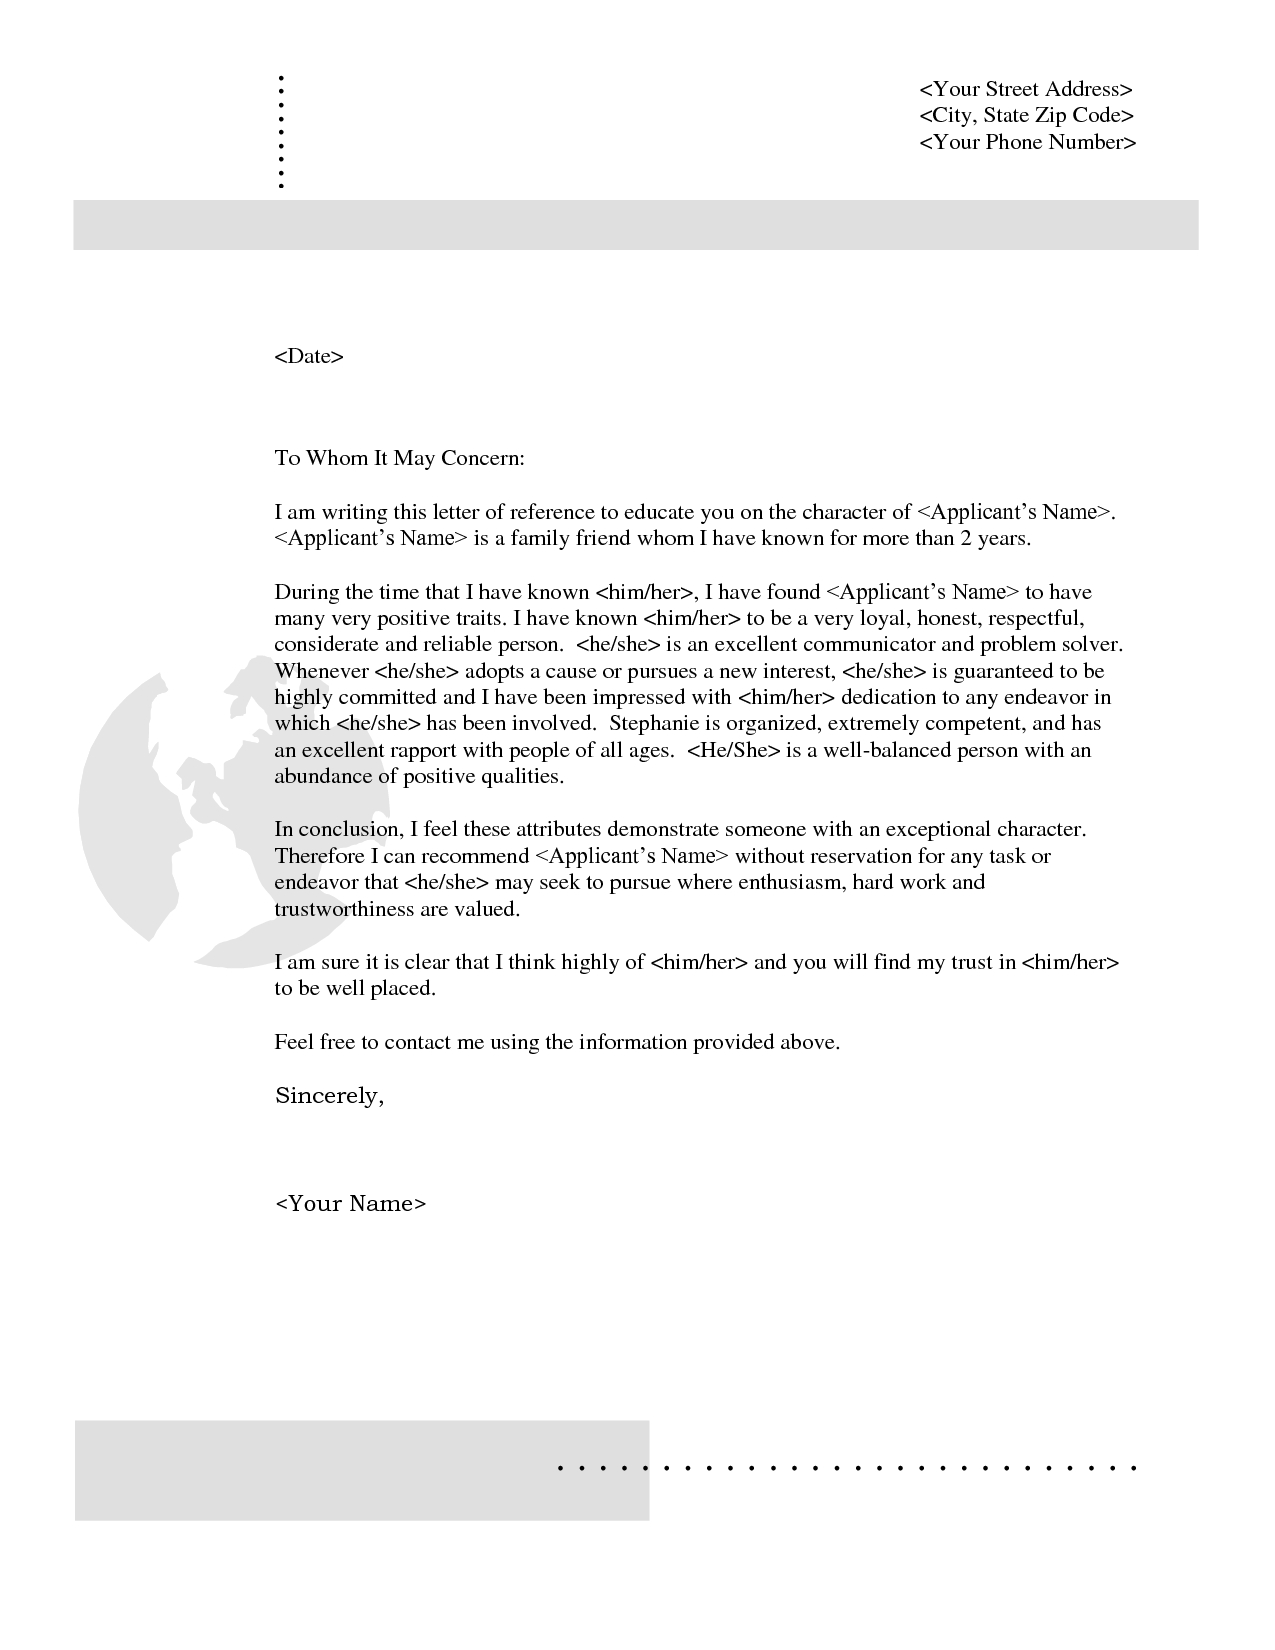 Rental Reference Letter From Friend Template - Rental Reference Letter From Friend Pdf format